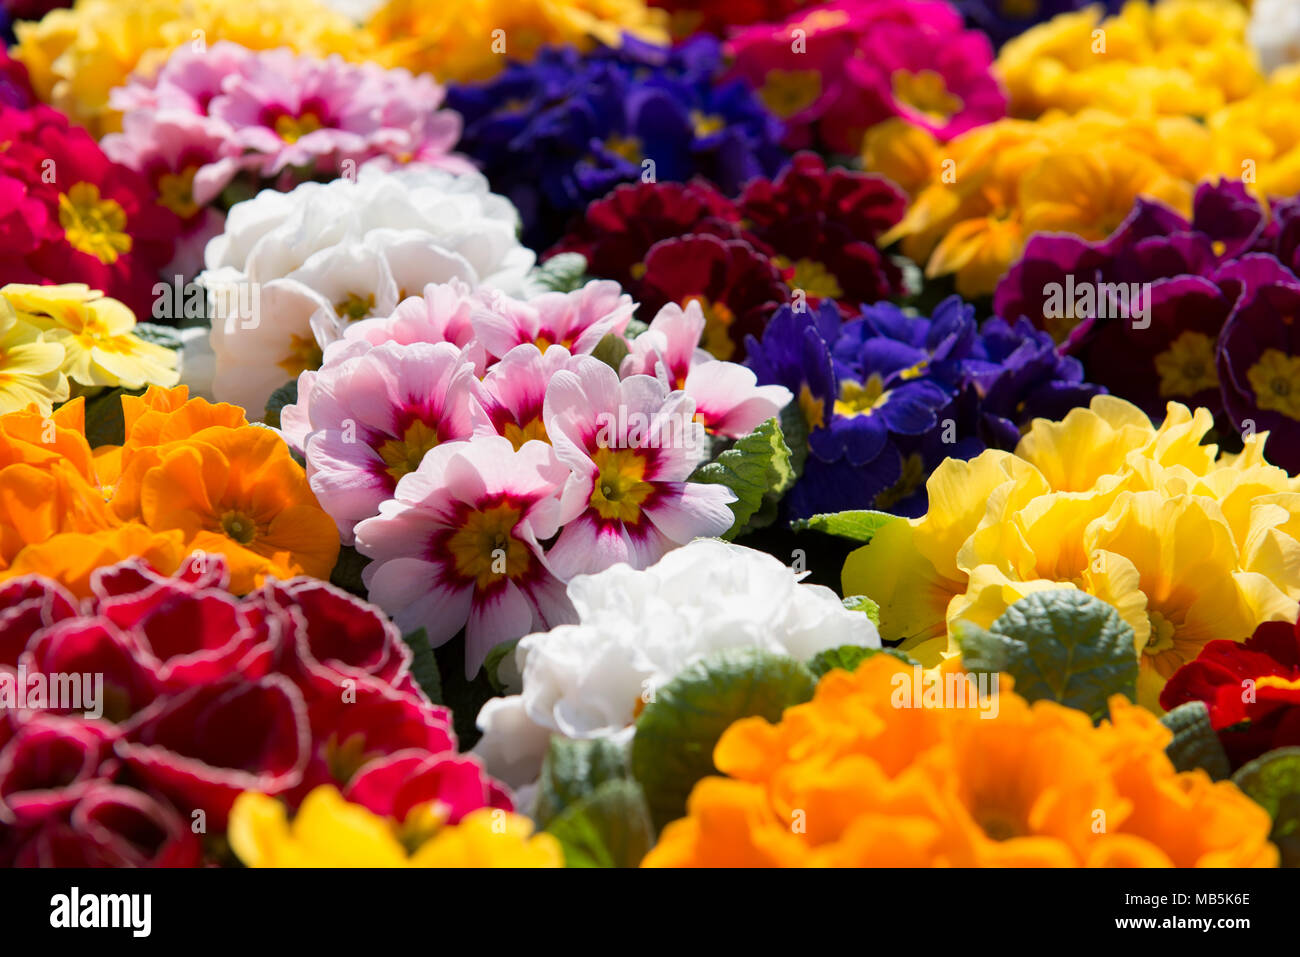 Primrose flowers of different colors Stock Photo